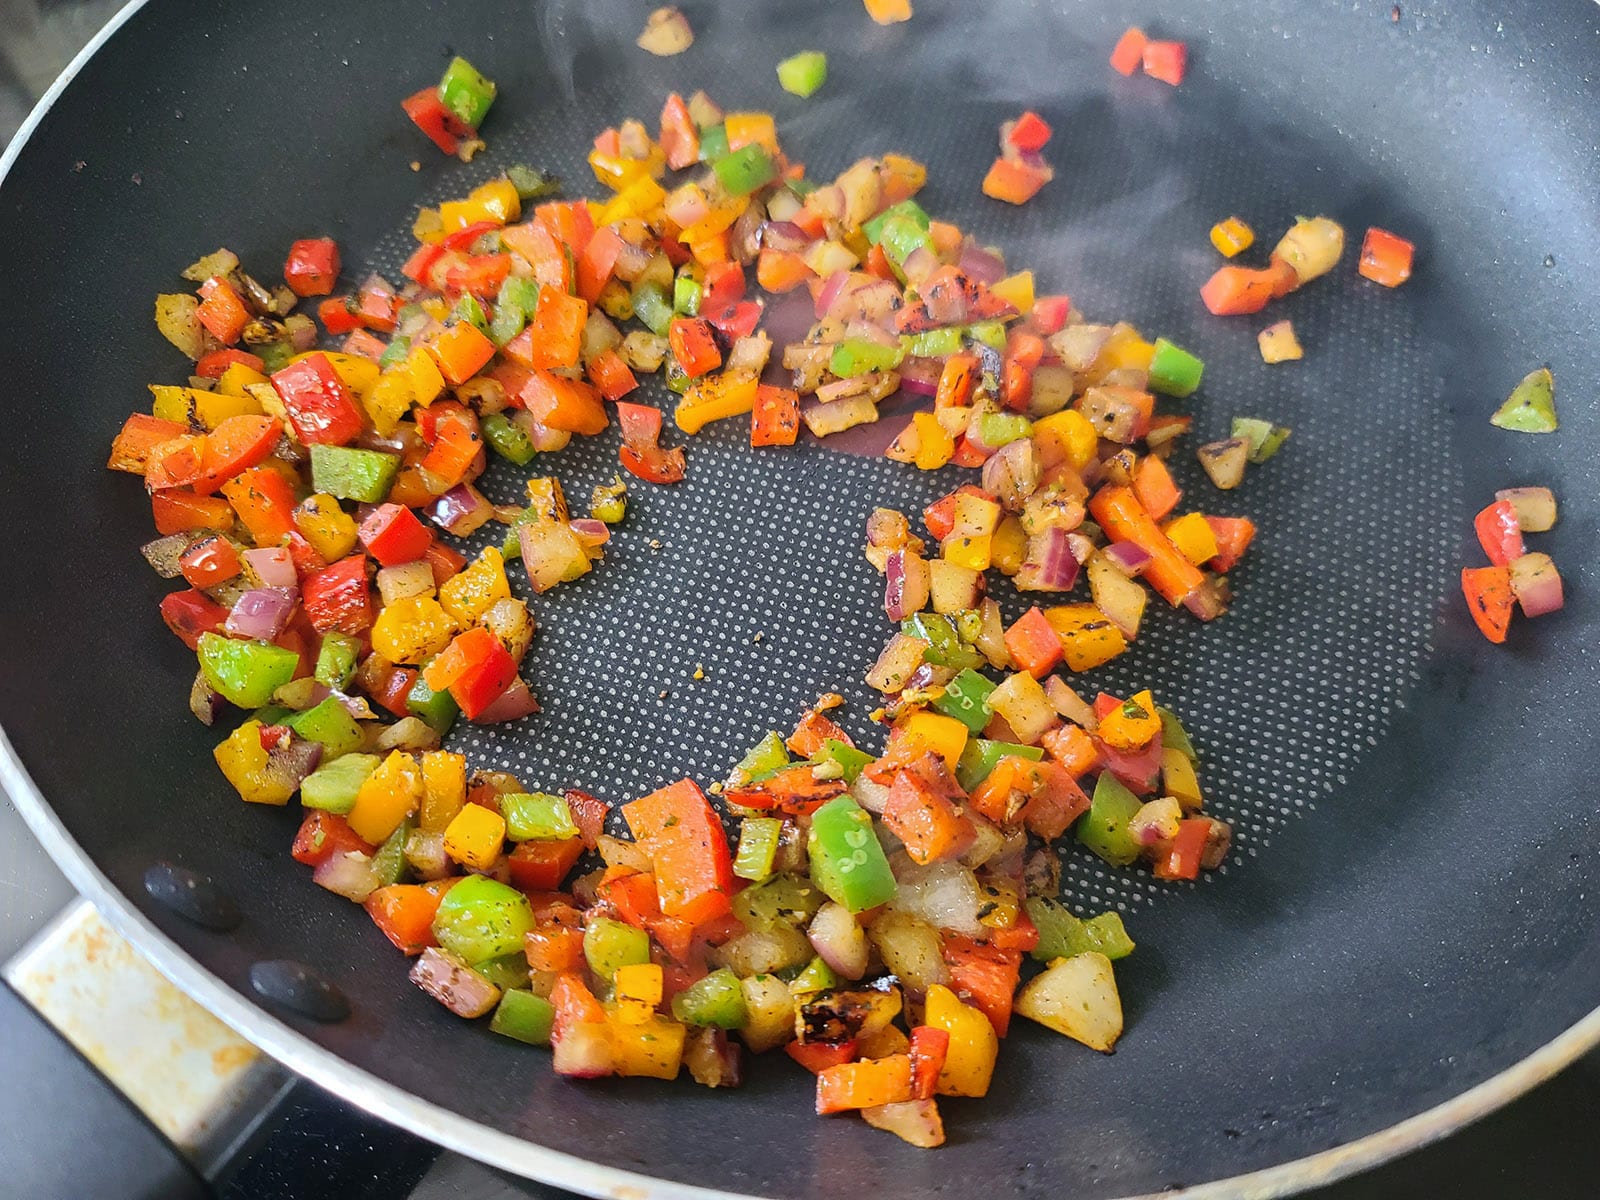 Chopped up bell peppers cooking in a nonstick pan.